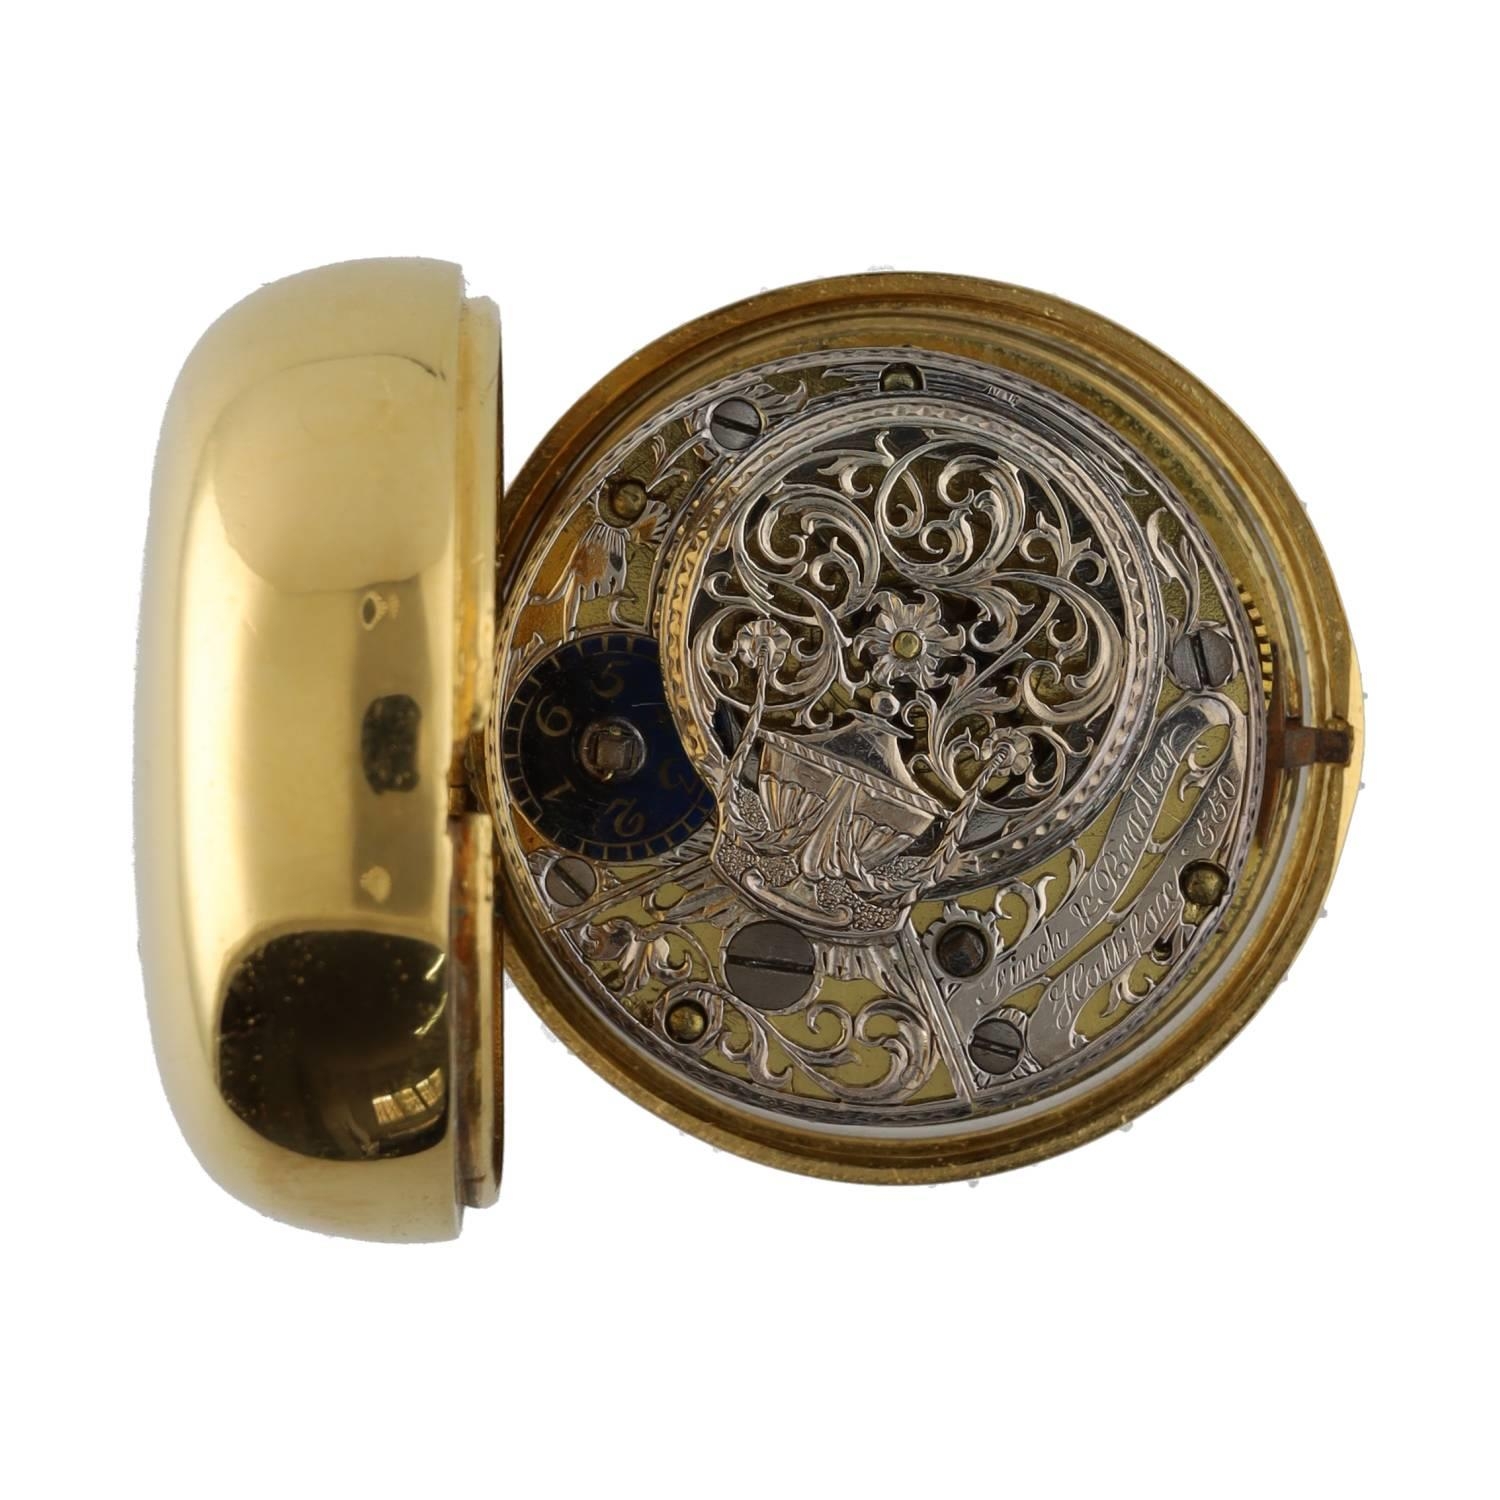 Finch & Bradley, Halifax - fine 18th century gilt pair cased verge pocket watch, the movement with - Image 3 of 6